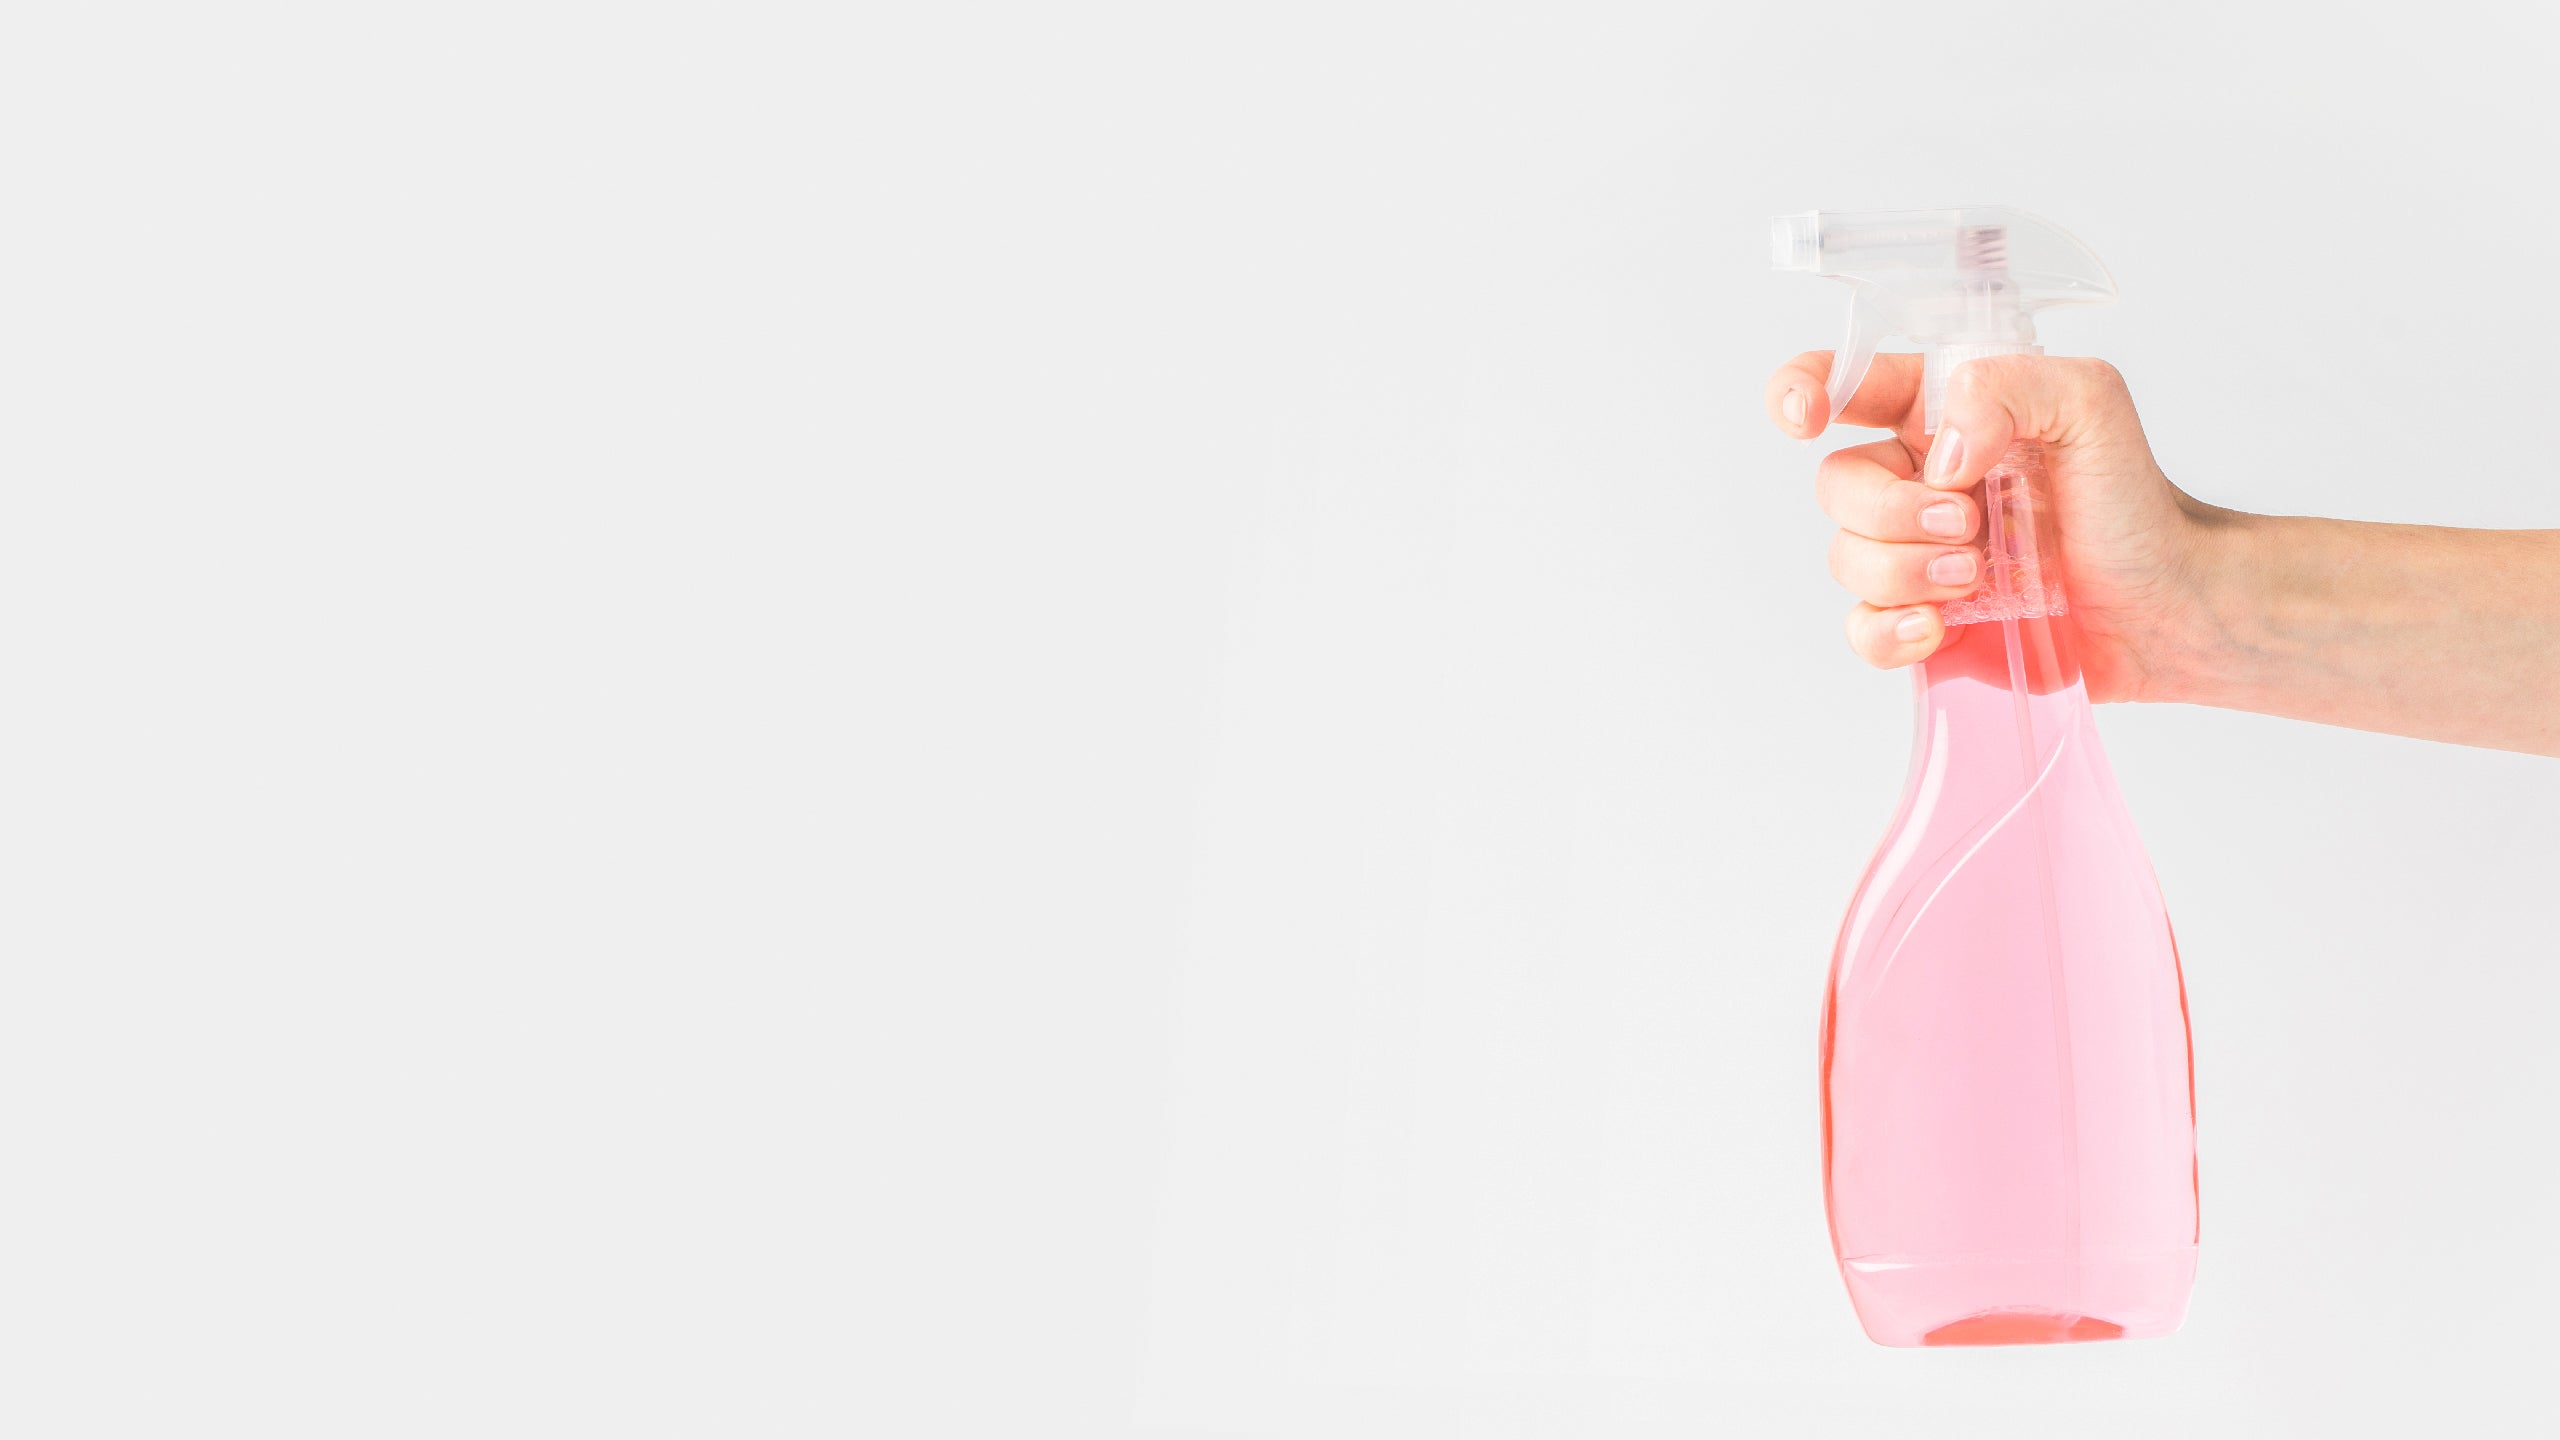 Stock photo of a hand squeezing a spritzer bottle